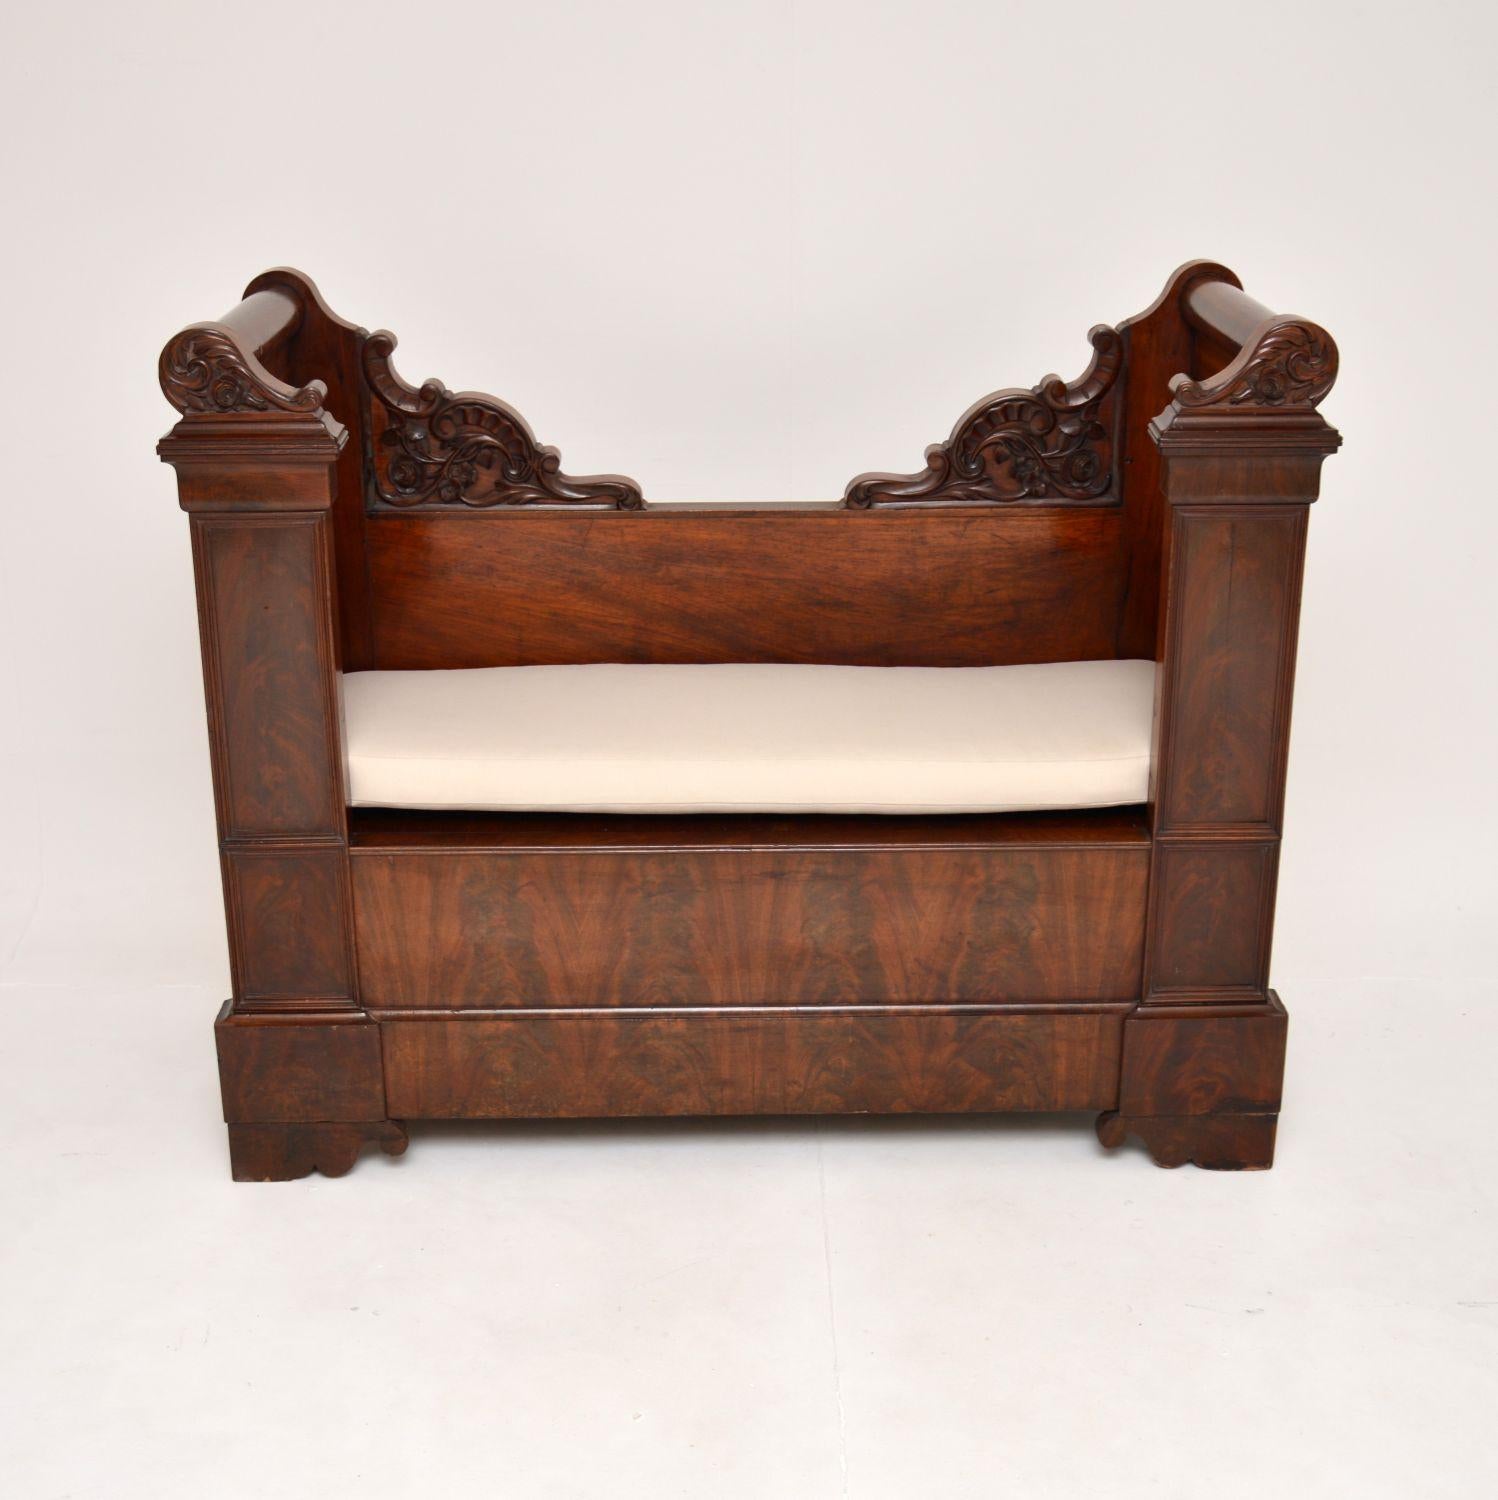 A very interesting and beautiful antique William IV period bench. This was made in continental Europe, possibly France, it dates from the 1830-1840’s.

The quality is superb, this is very well made with beautiful carving and flame grain patterns. It